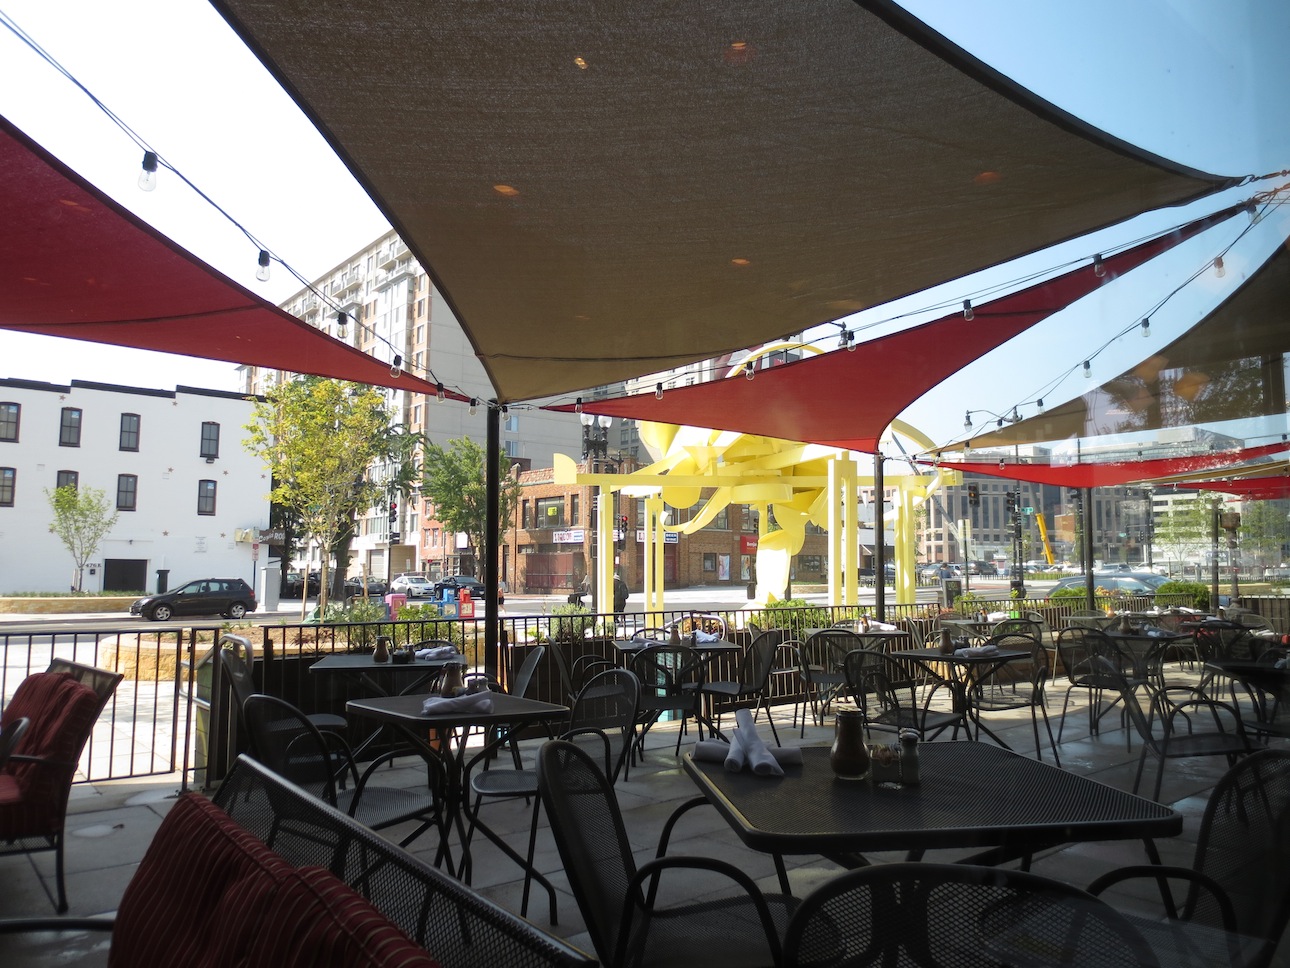 Patio seating outside Busboys.